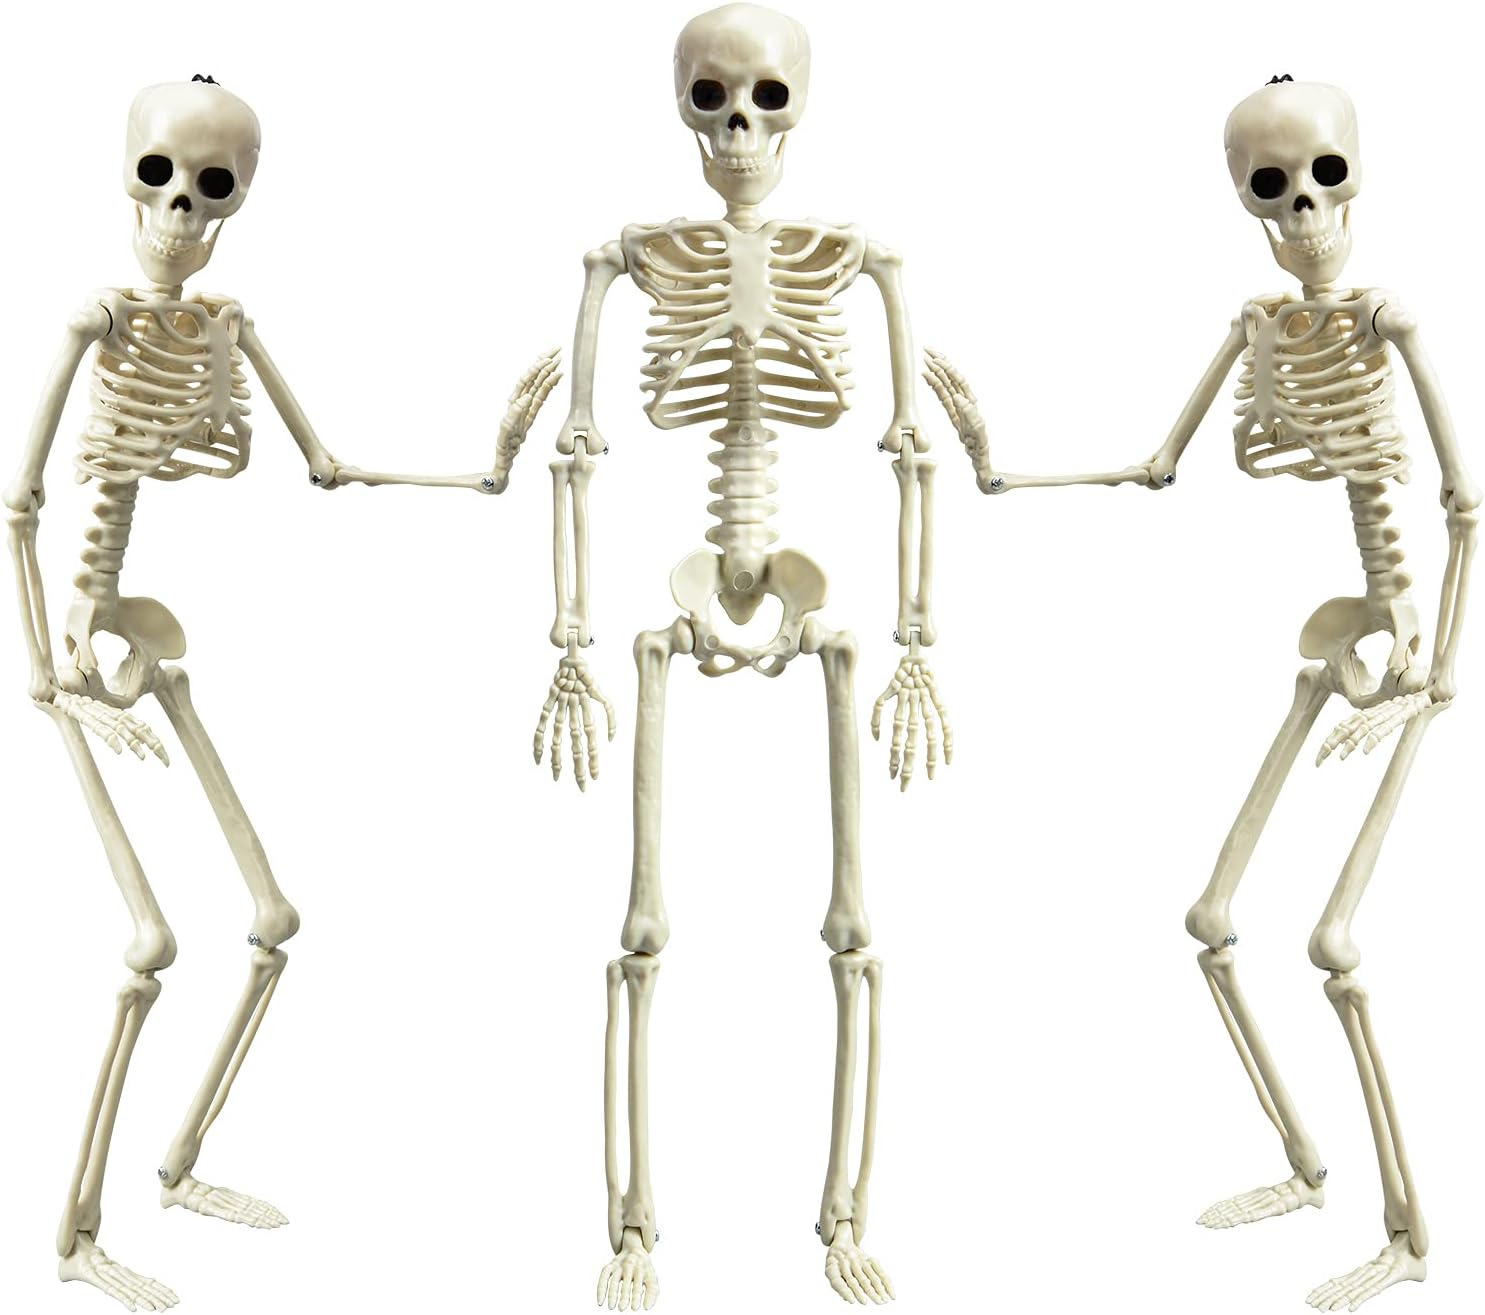 16” Posable Halloween Skeleton- Full Body Halloween Skeleton with Movable Joints